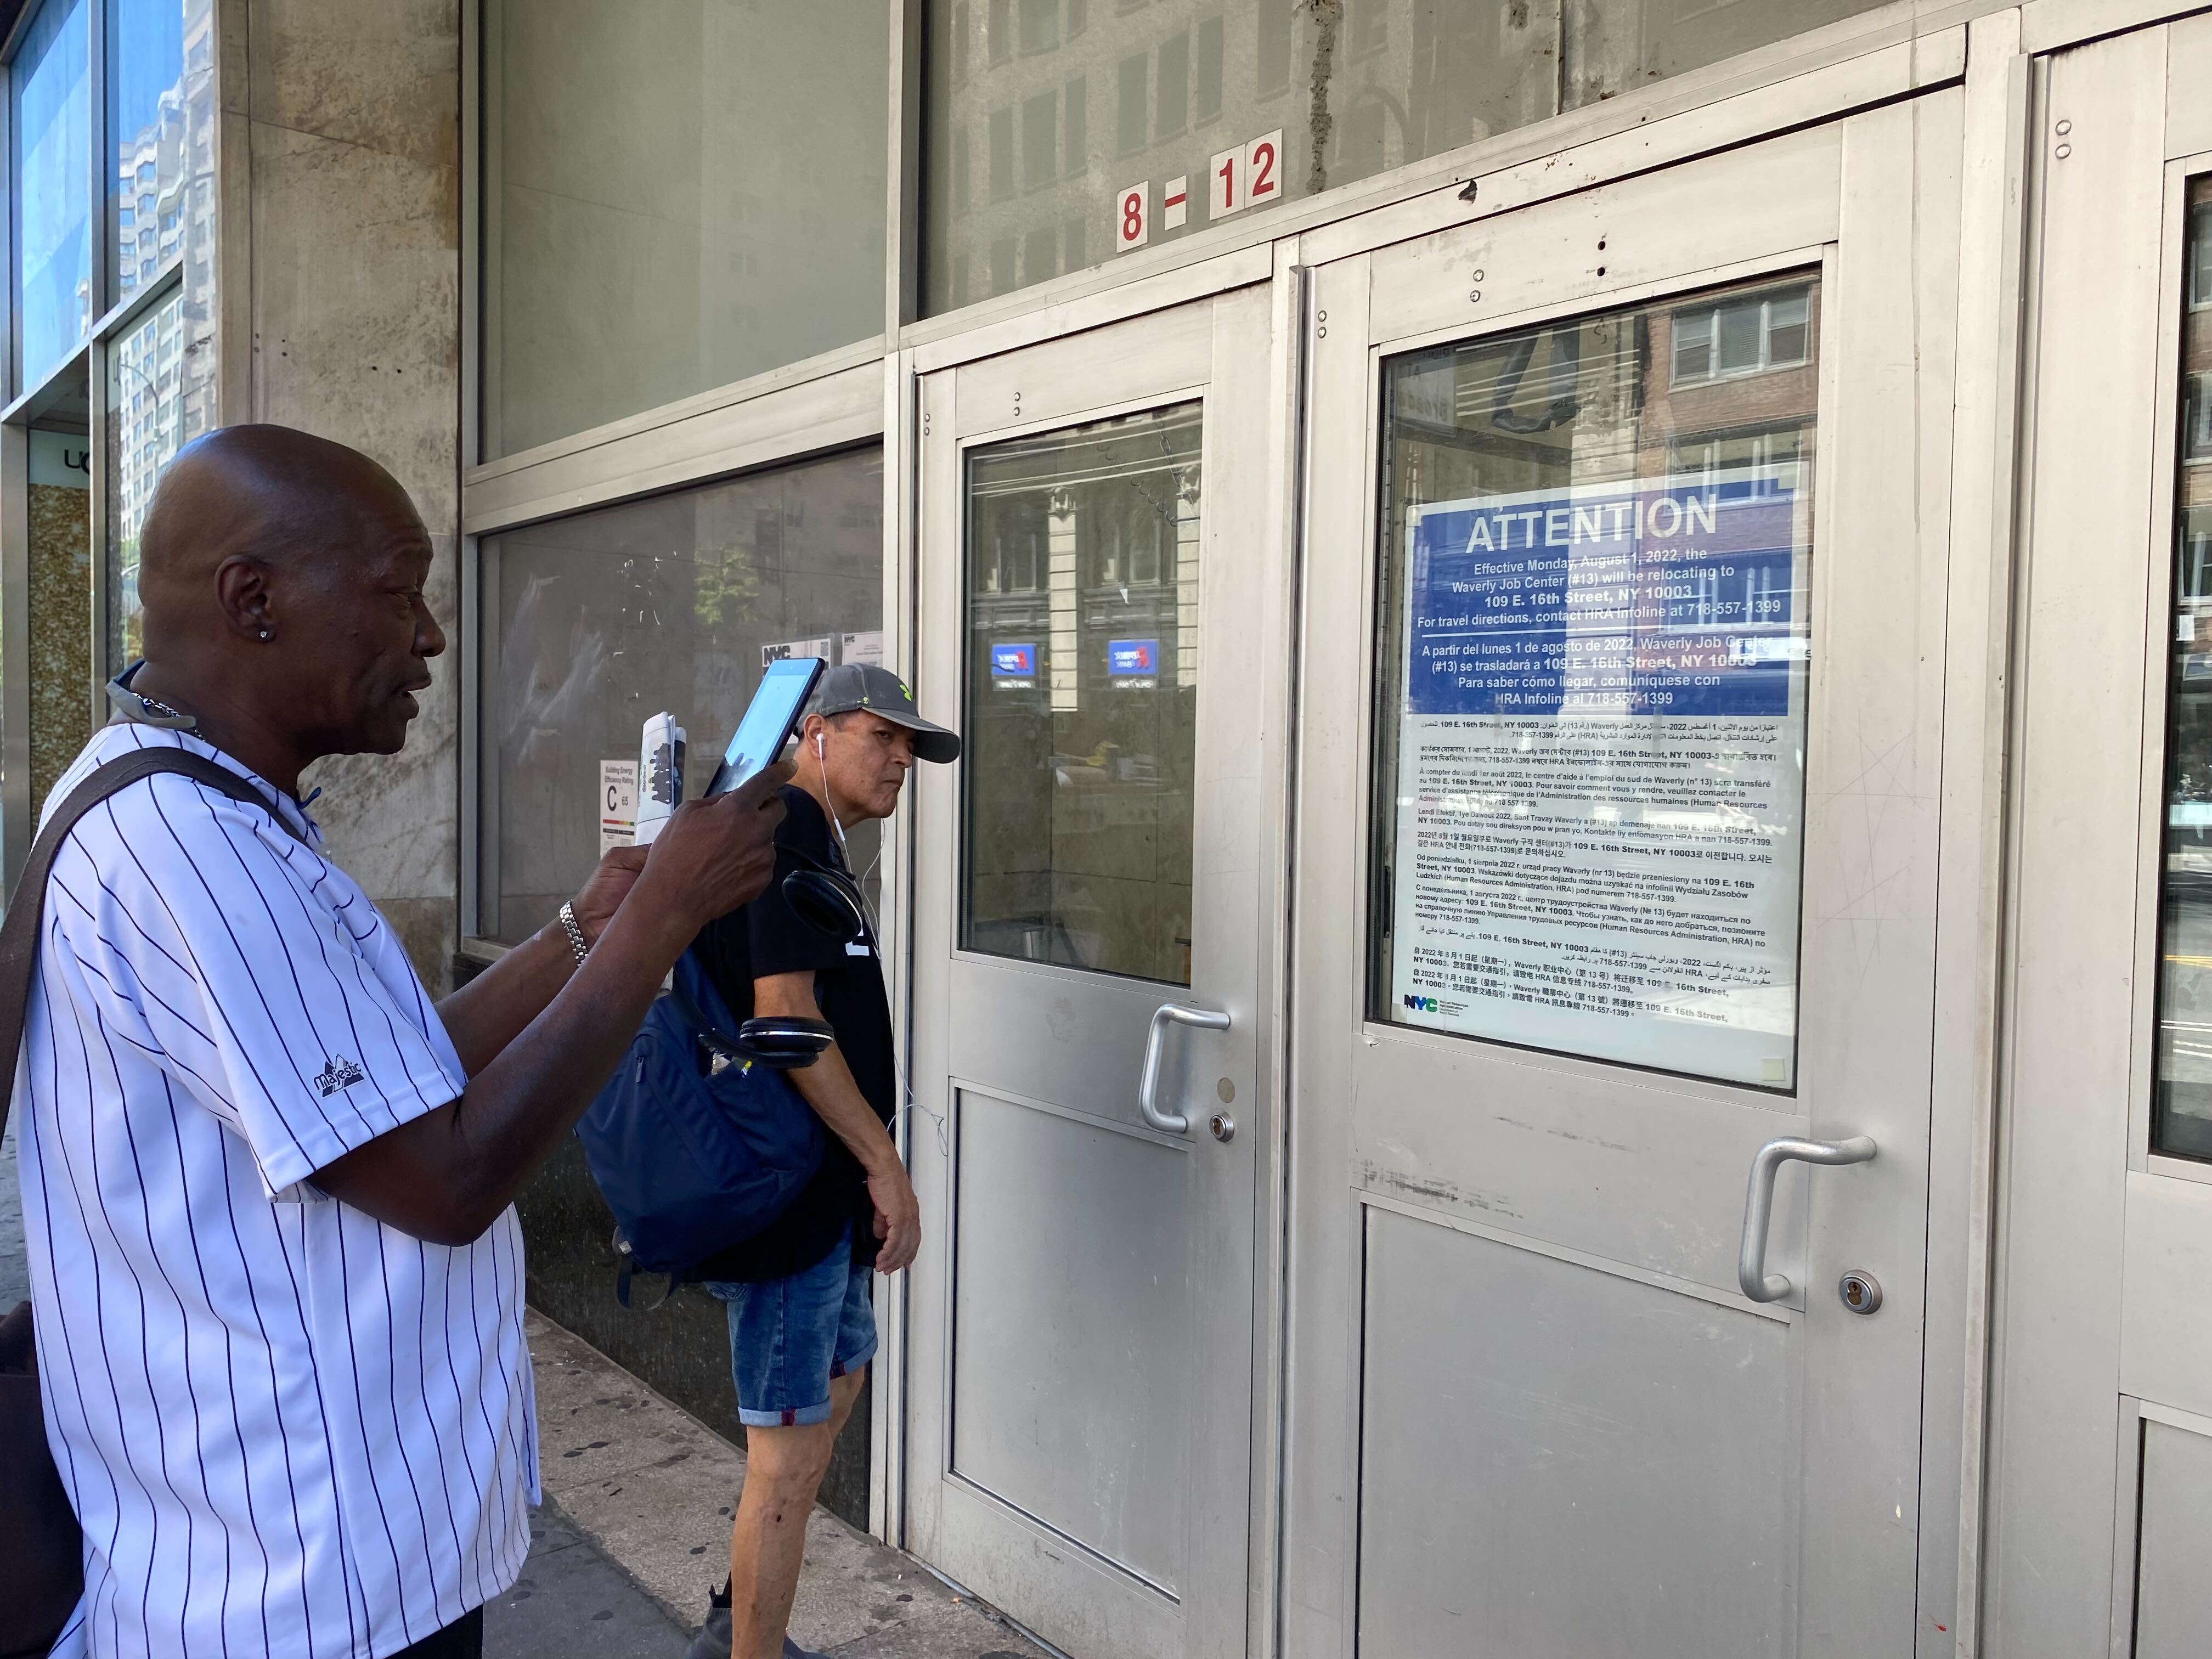 A photo of people reading the closure notice at a Union Square benefits center.